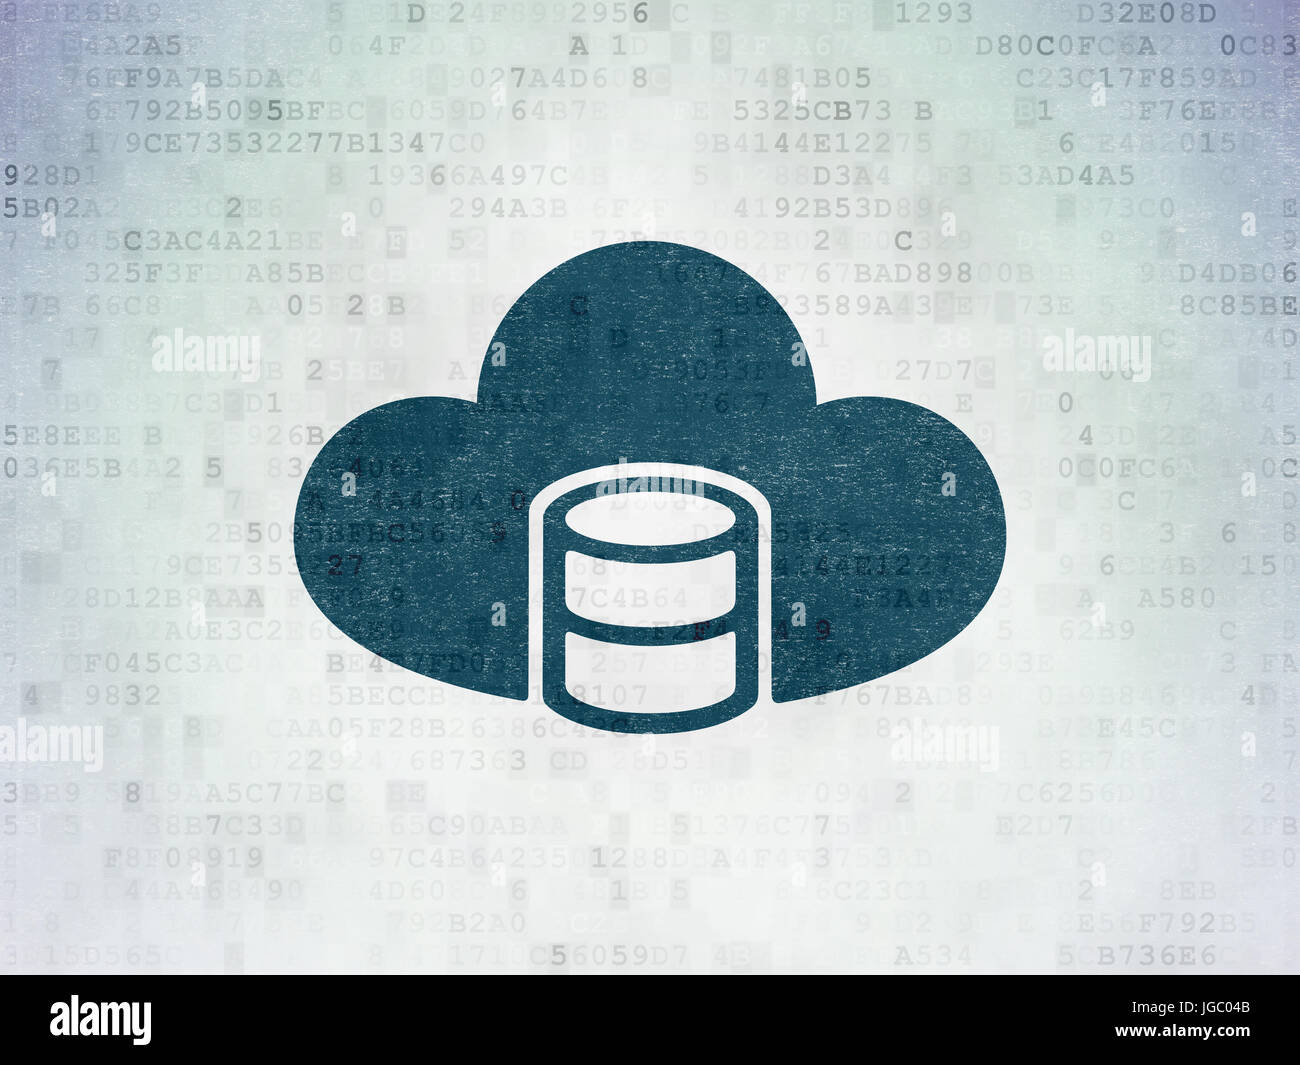 Software concept: Database With Cloud on Digital Data Paper background Stock Photo